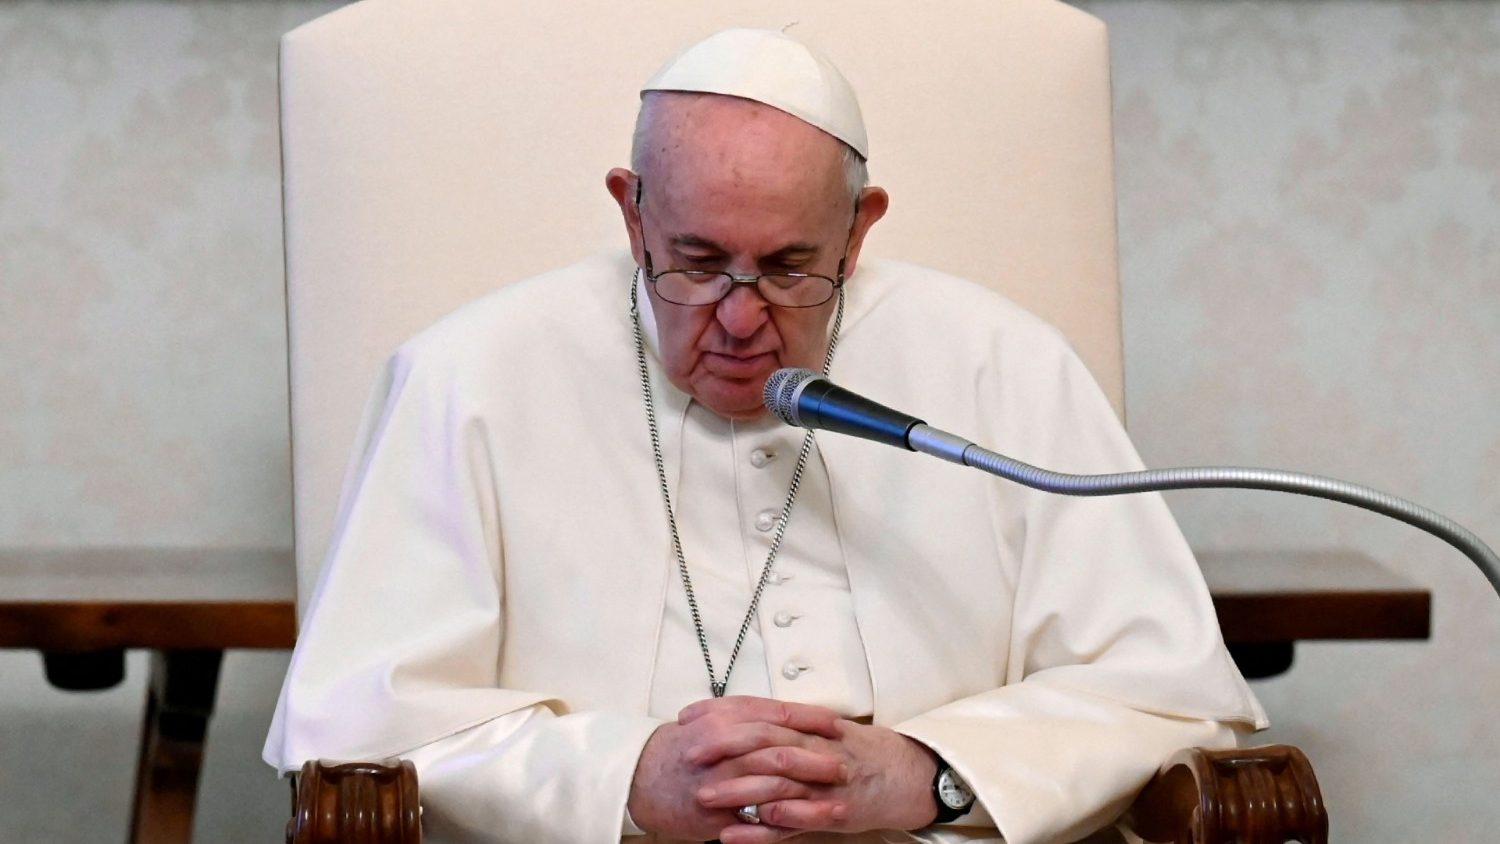 Pope Francis meets privately with Portuguese abuse victims - Vatican News